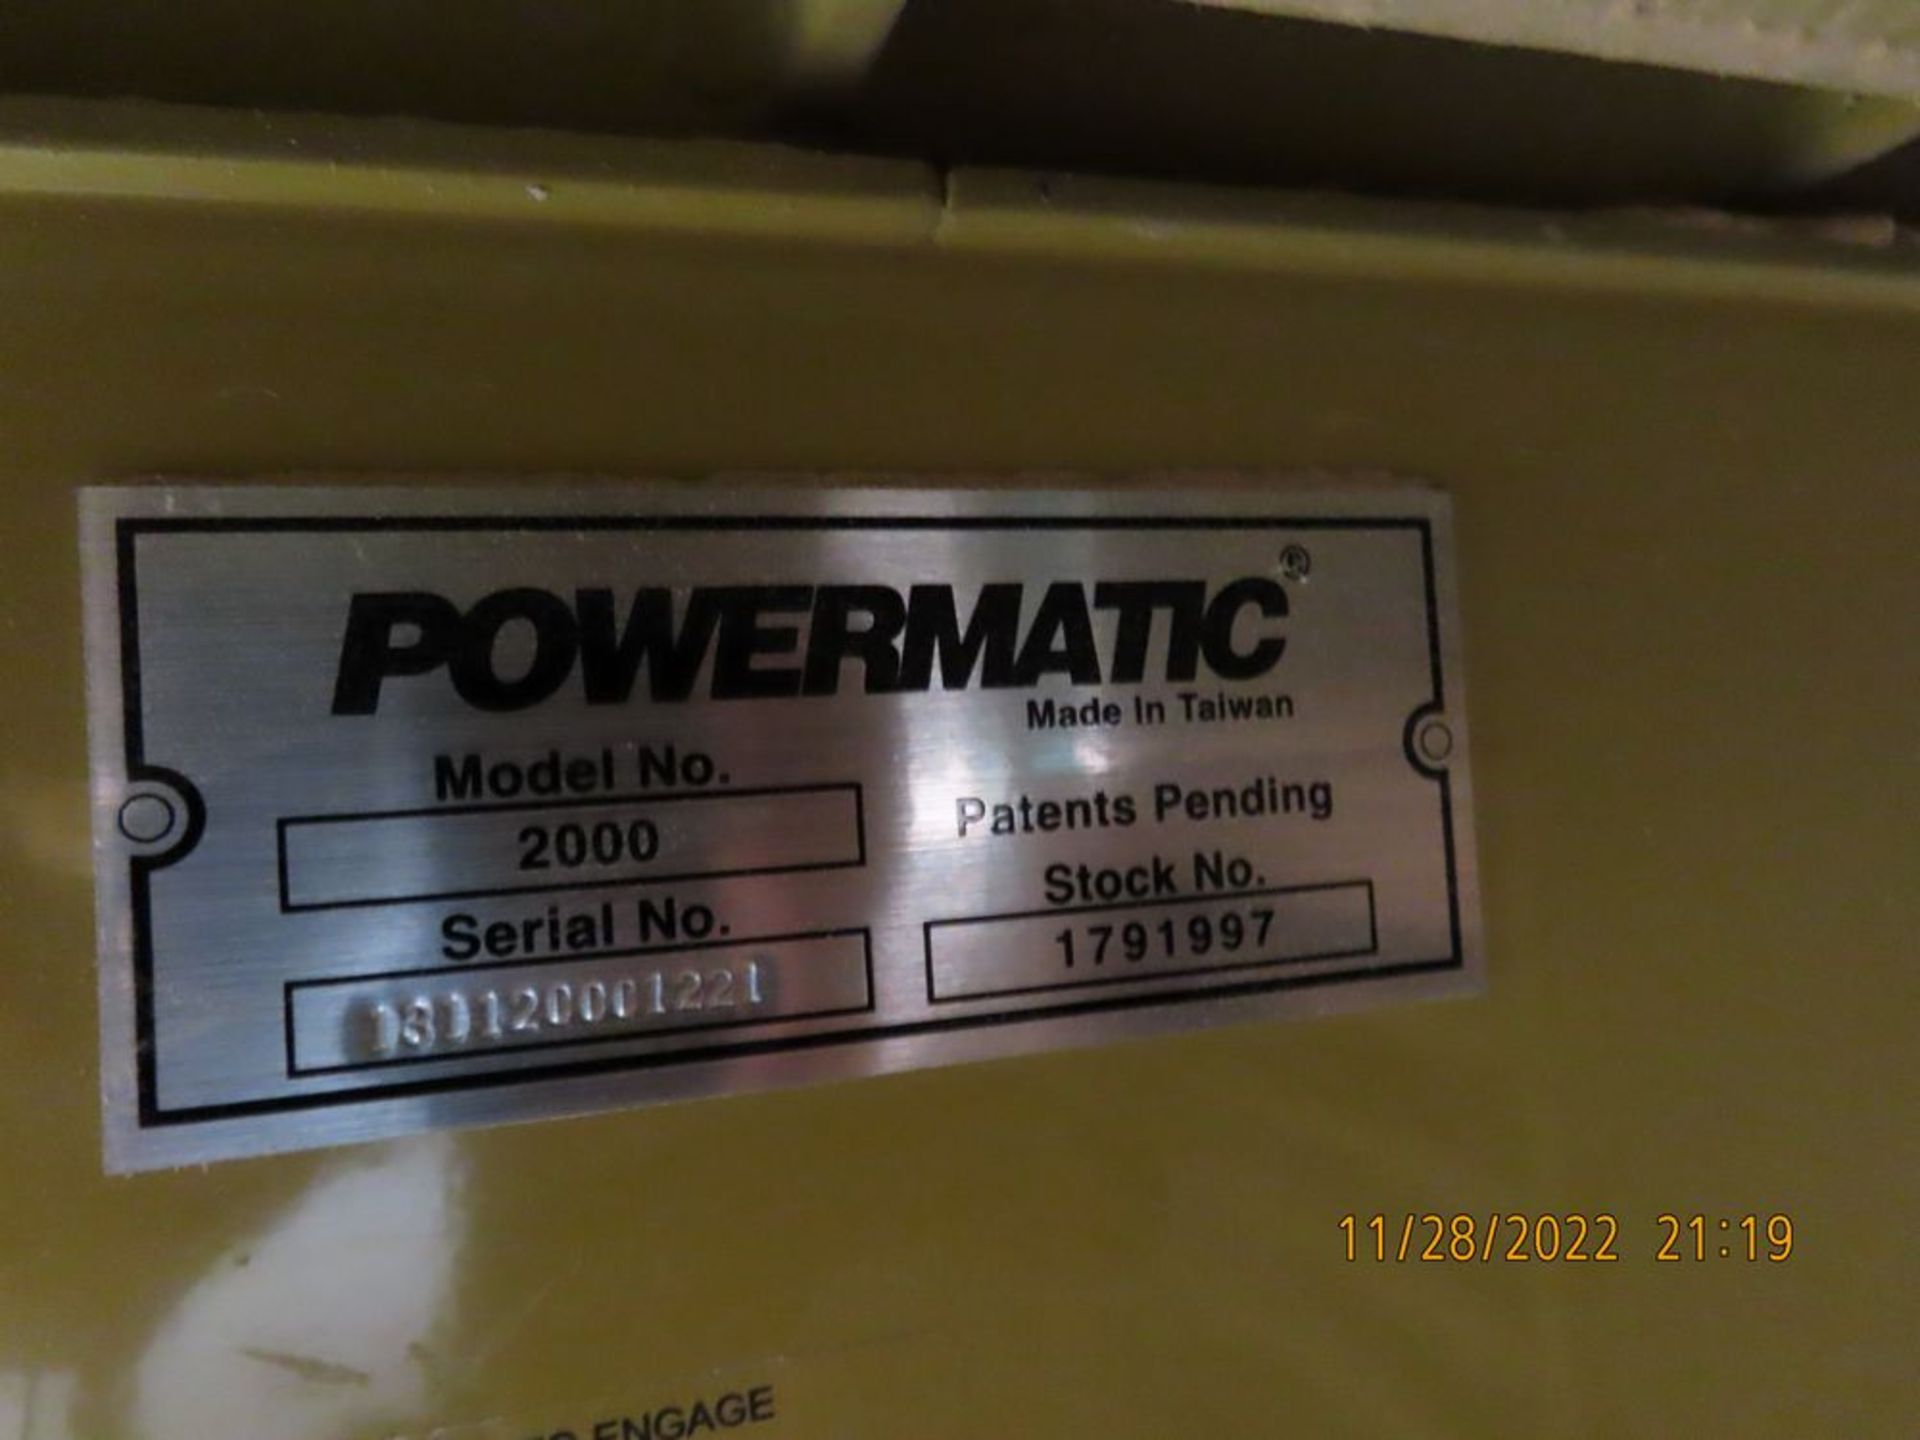 Powermatic mod. 2000, 12'' Table Saw w/ Excaliber Safety Guard; S/N 13112000121 (LOCATION: 11170 - Image 3 of 3